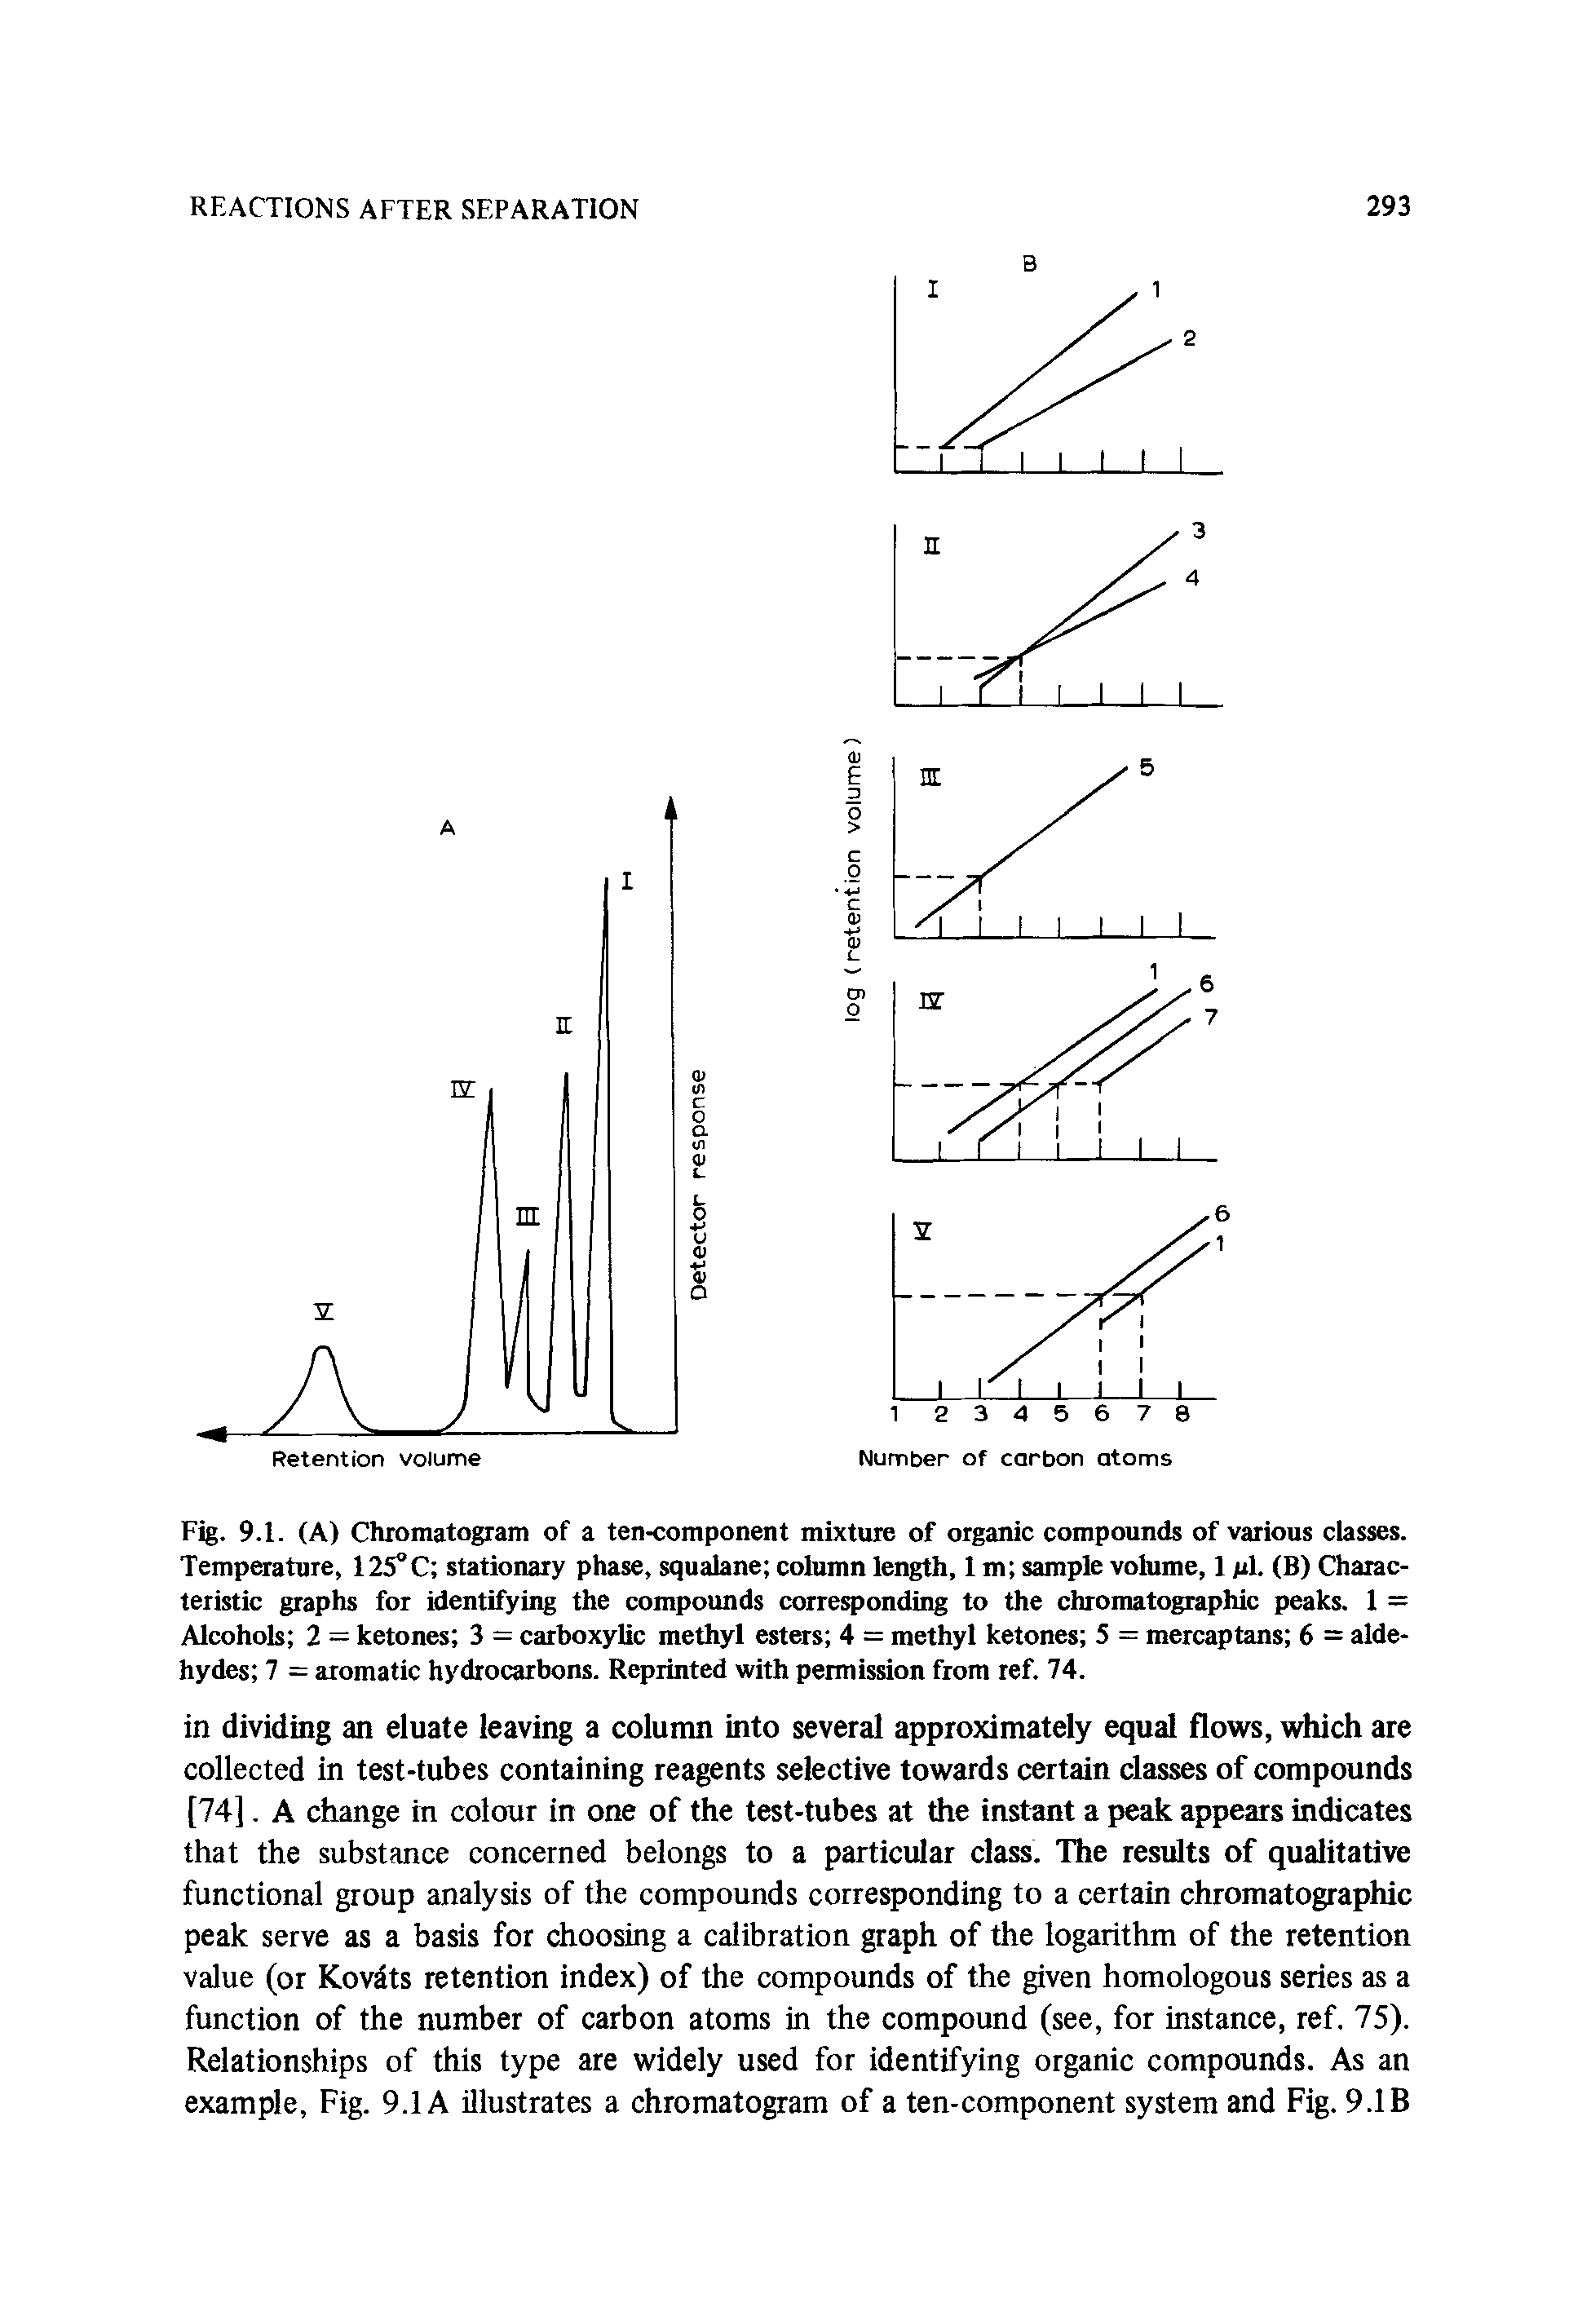 Fig. 9.1. (A) Chromatogram of a ten<omponent mixture of organic compounds of various classes. Temperature, 125°C stationary phase, squalane column length, 1 m sample volume, 1 pi. (B) Characteristic graphs for identifying the compounds corresponding to the chromatographic peaks. 1 = Alcohols 2 = ketones 3 = carboxylic methyl esters 4 = methyl ketones 5 = mercaptans 6 = aldehydes 7 = aromatic hydrocarbons. Reprinted with permission from ref. 74.